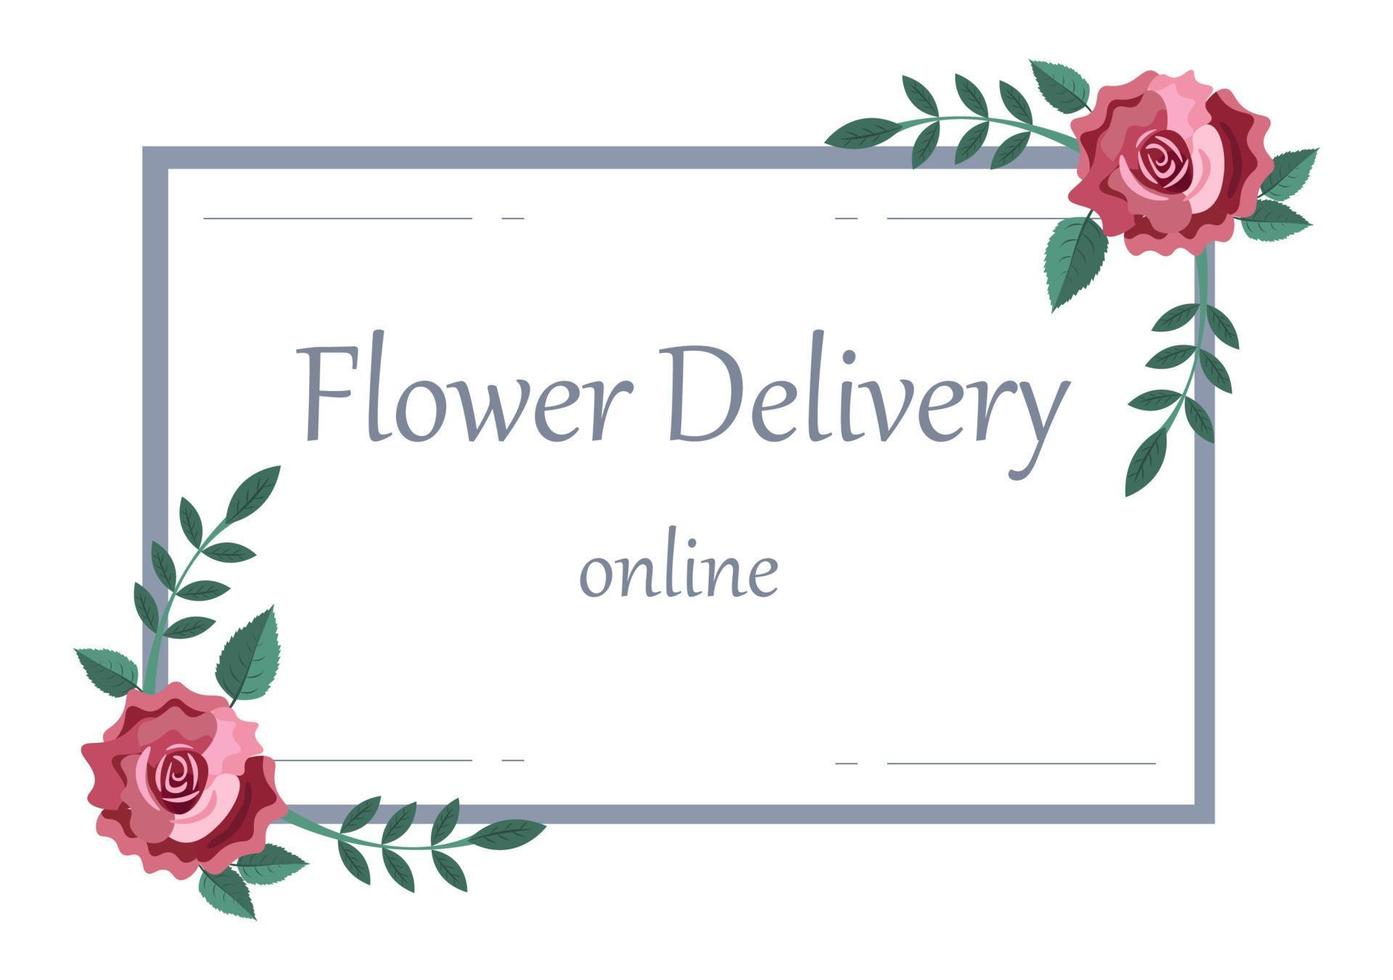 Flower Delivery Service Online Business with Courier Holding a Flowers Order Bouquet Using Trucks, Cars or Motorbikes. Background Vector Illustration